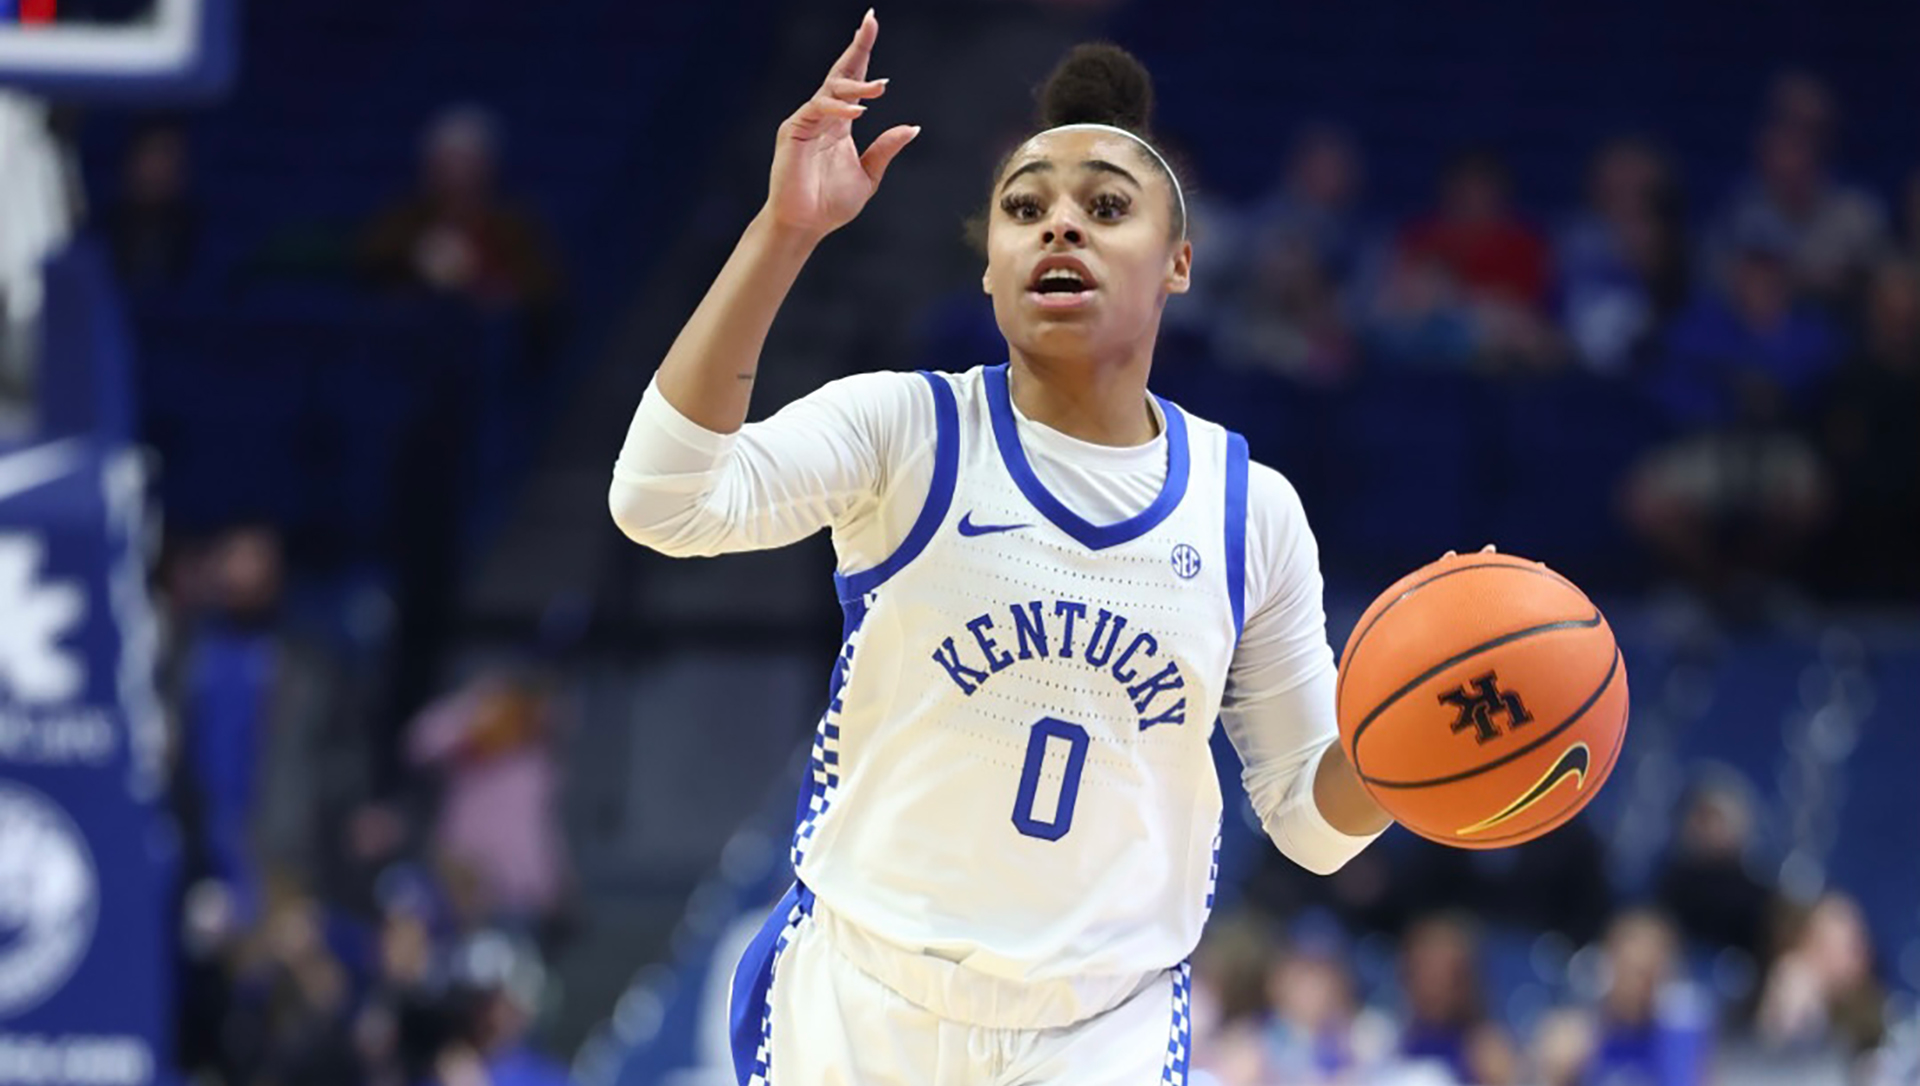 Kentucky-Lipscomb Postgame Notes